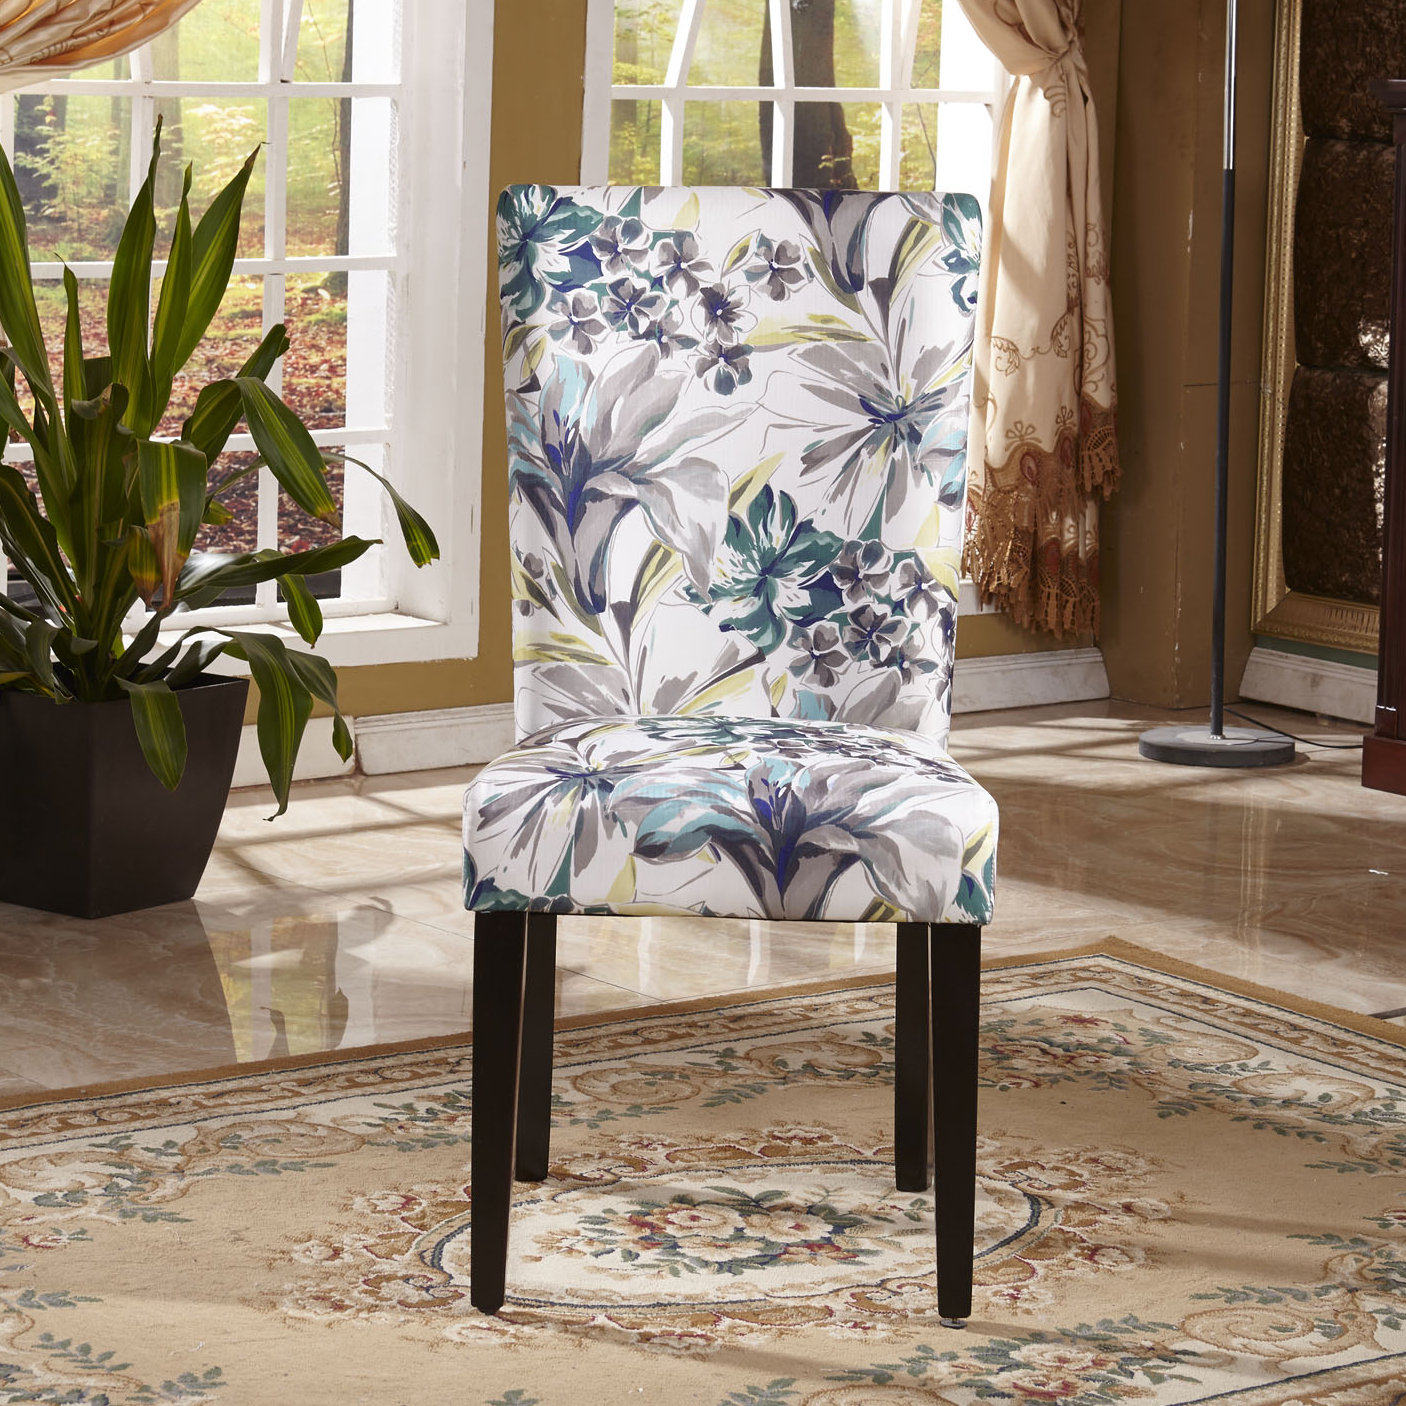 Bellasario Collection Elegant Floral Upholstered Dining Chair Reviews Wayfair